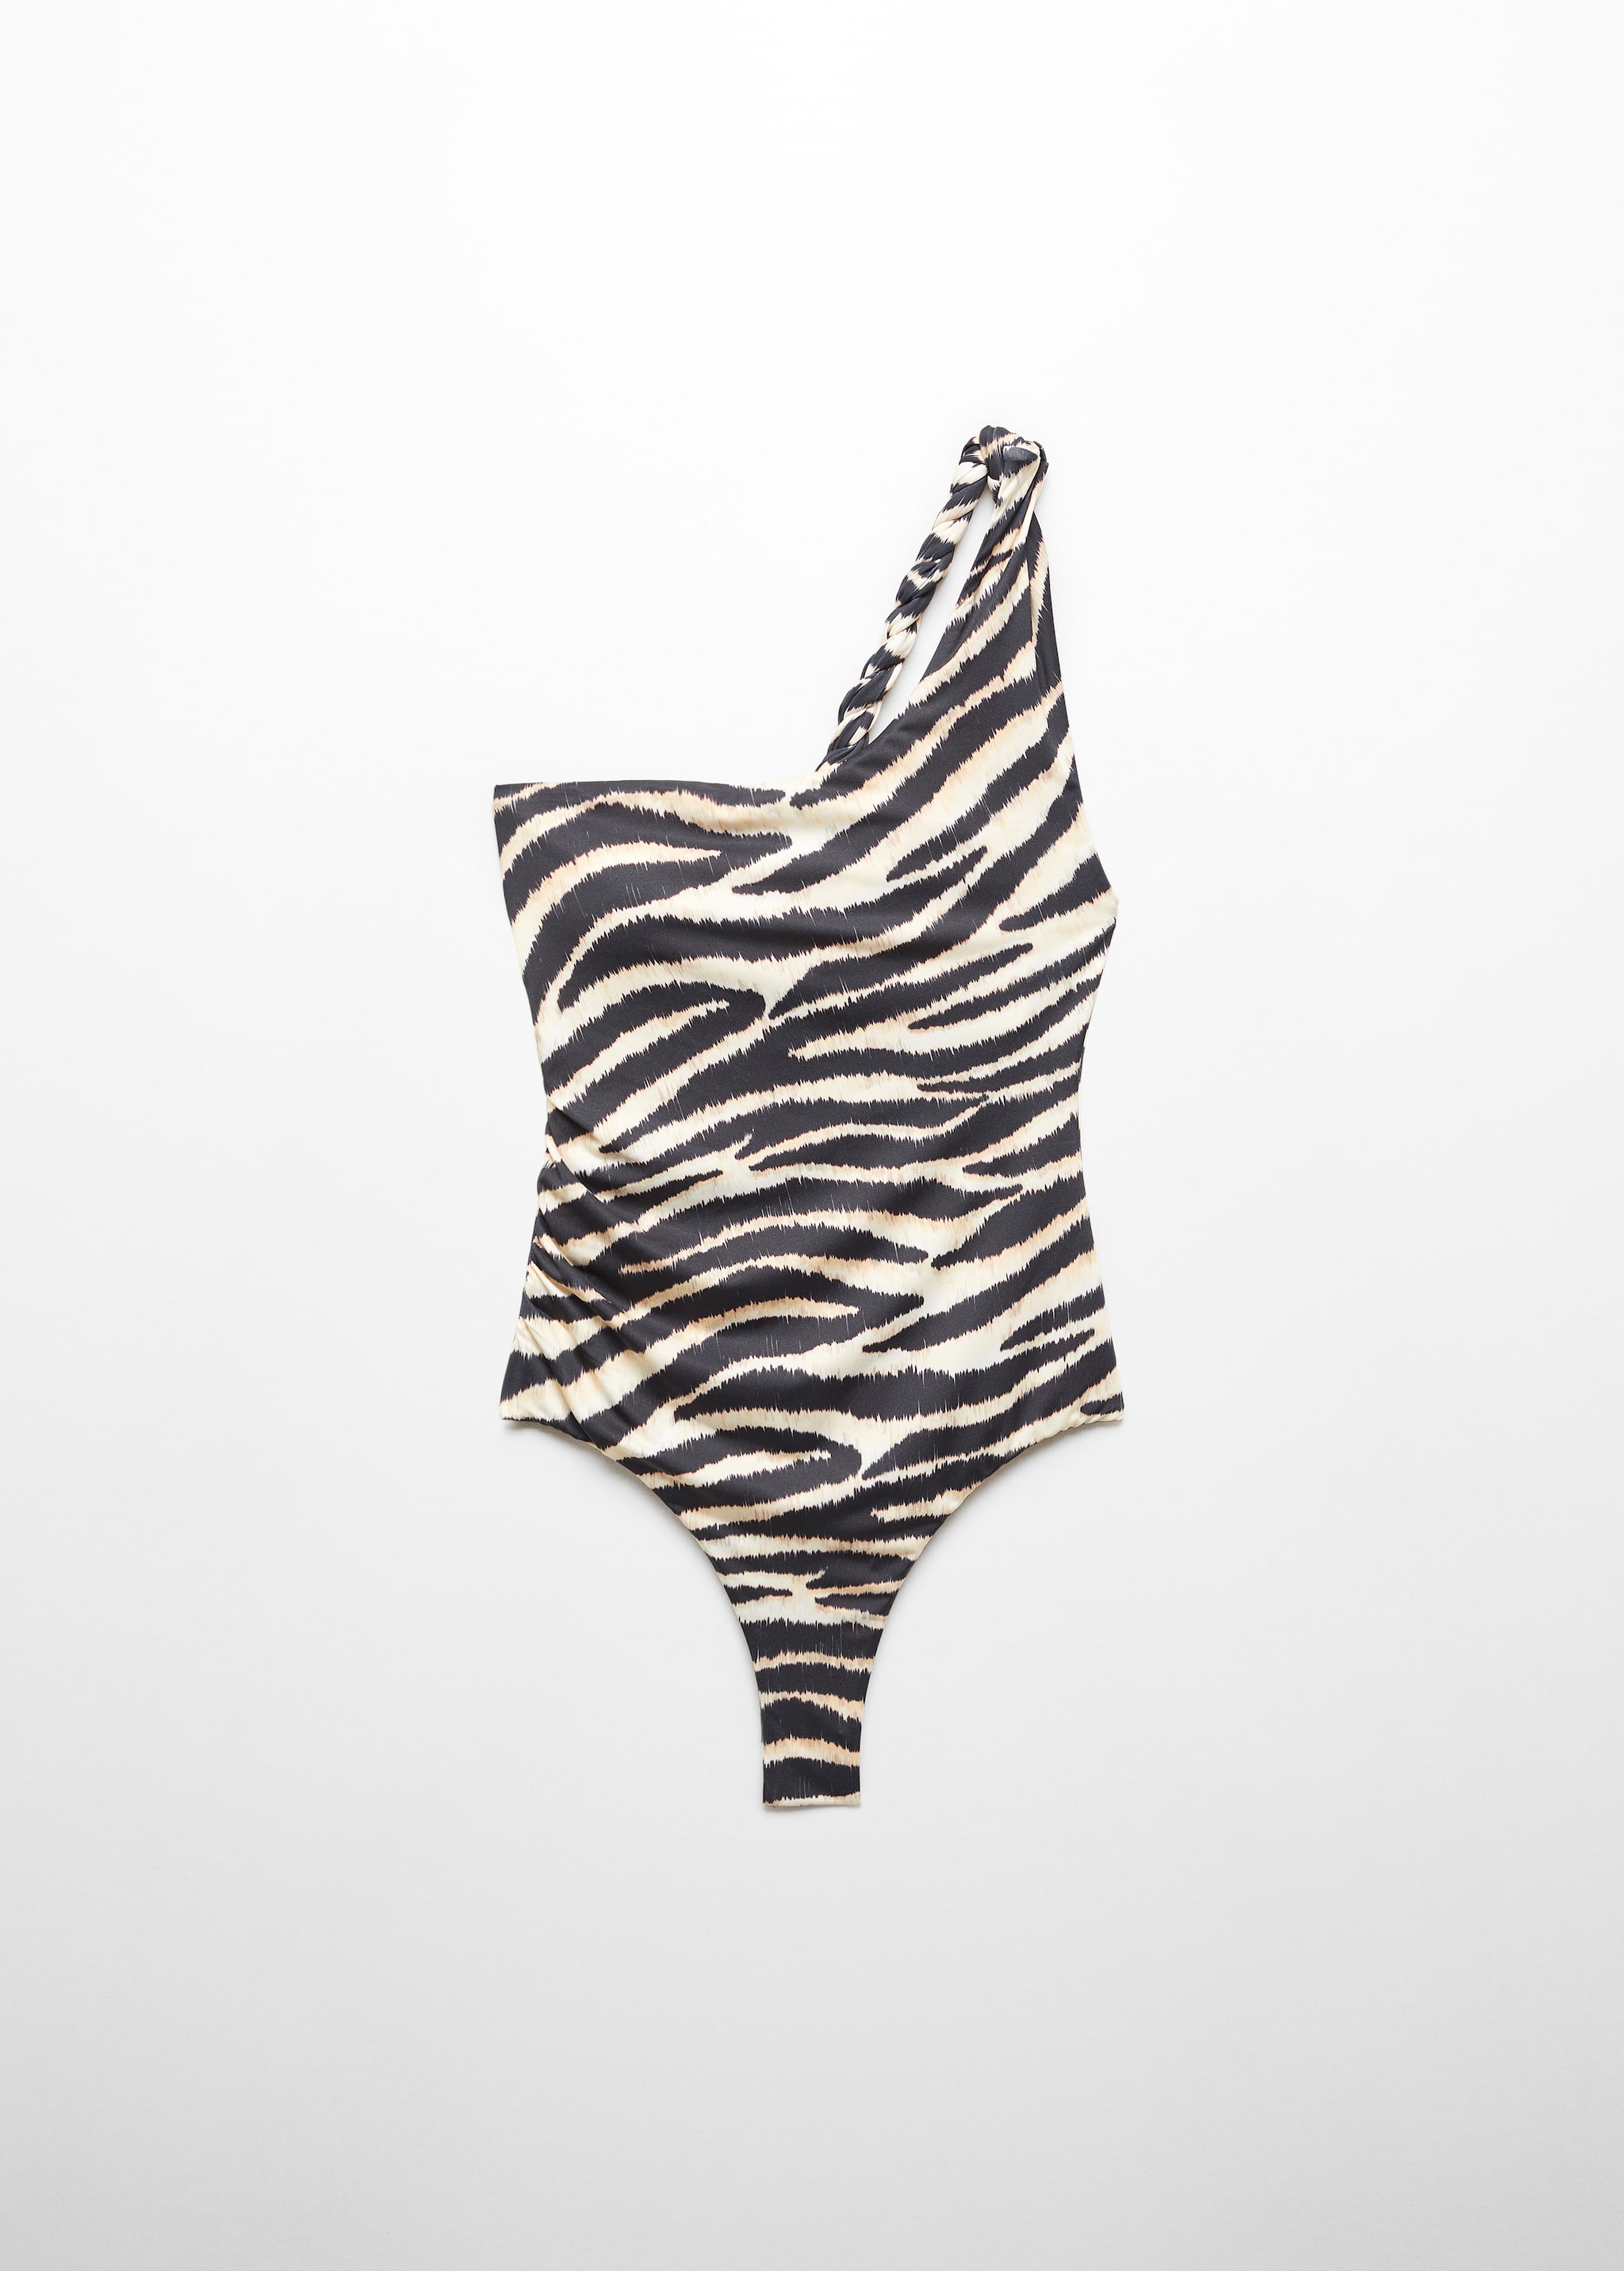 Animal print swimsuit - Article without model